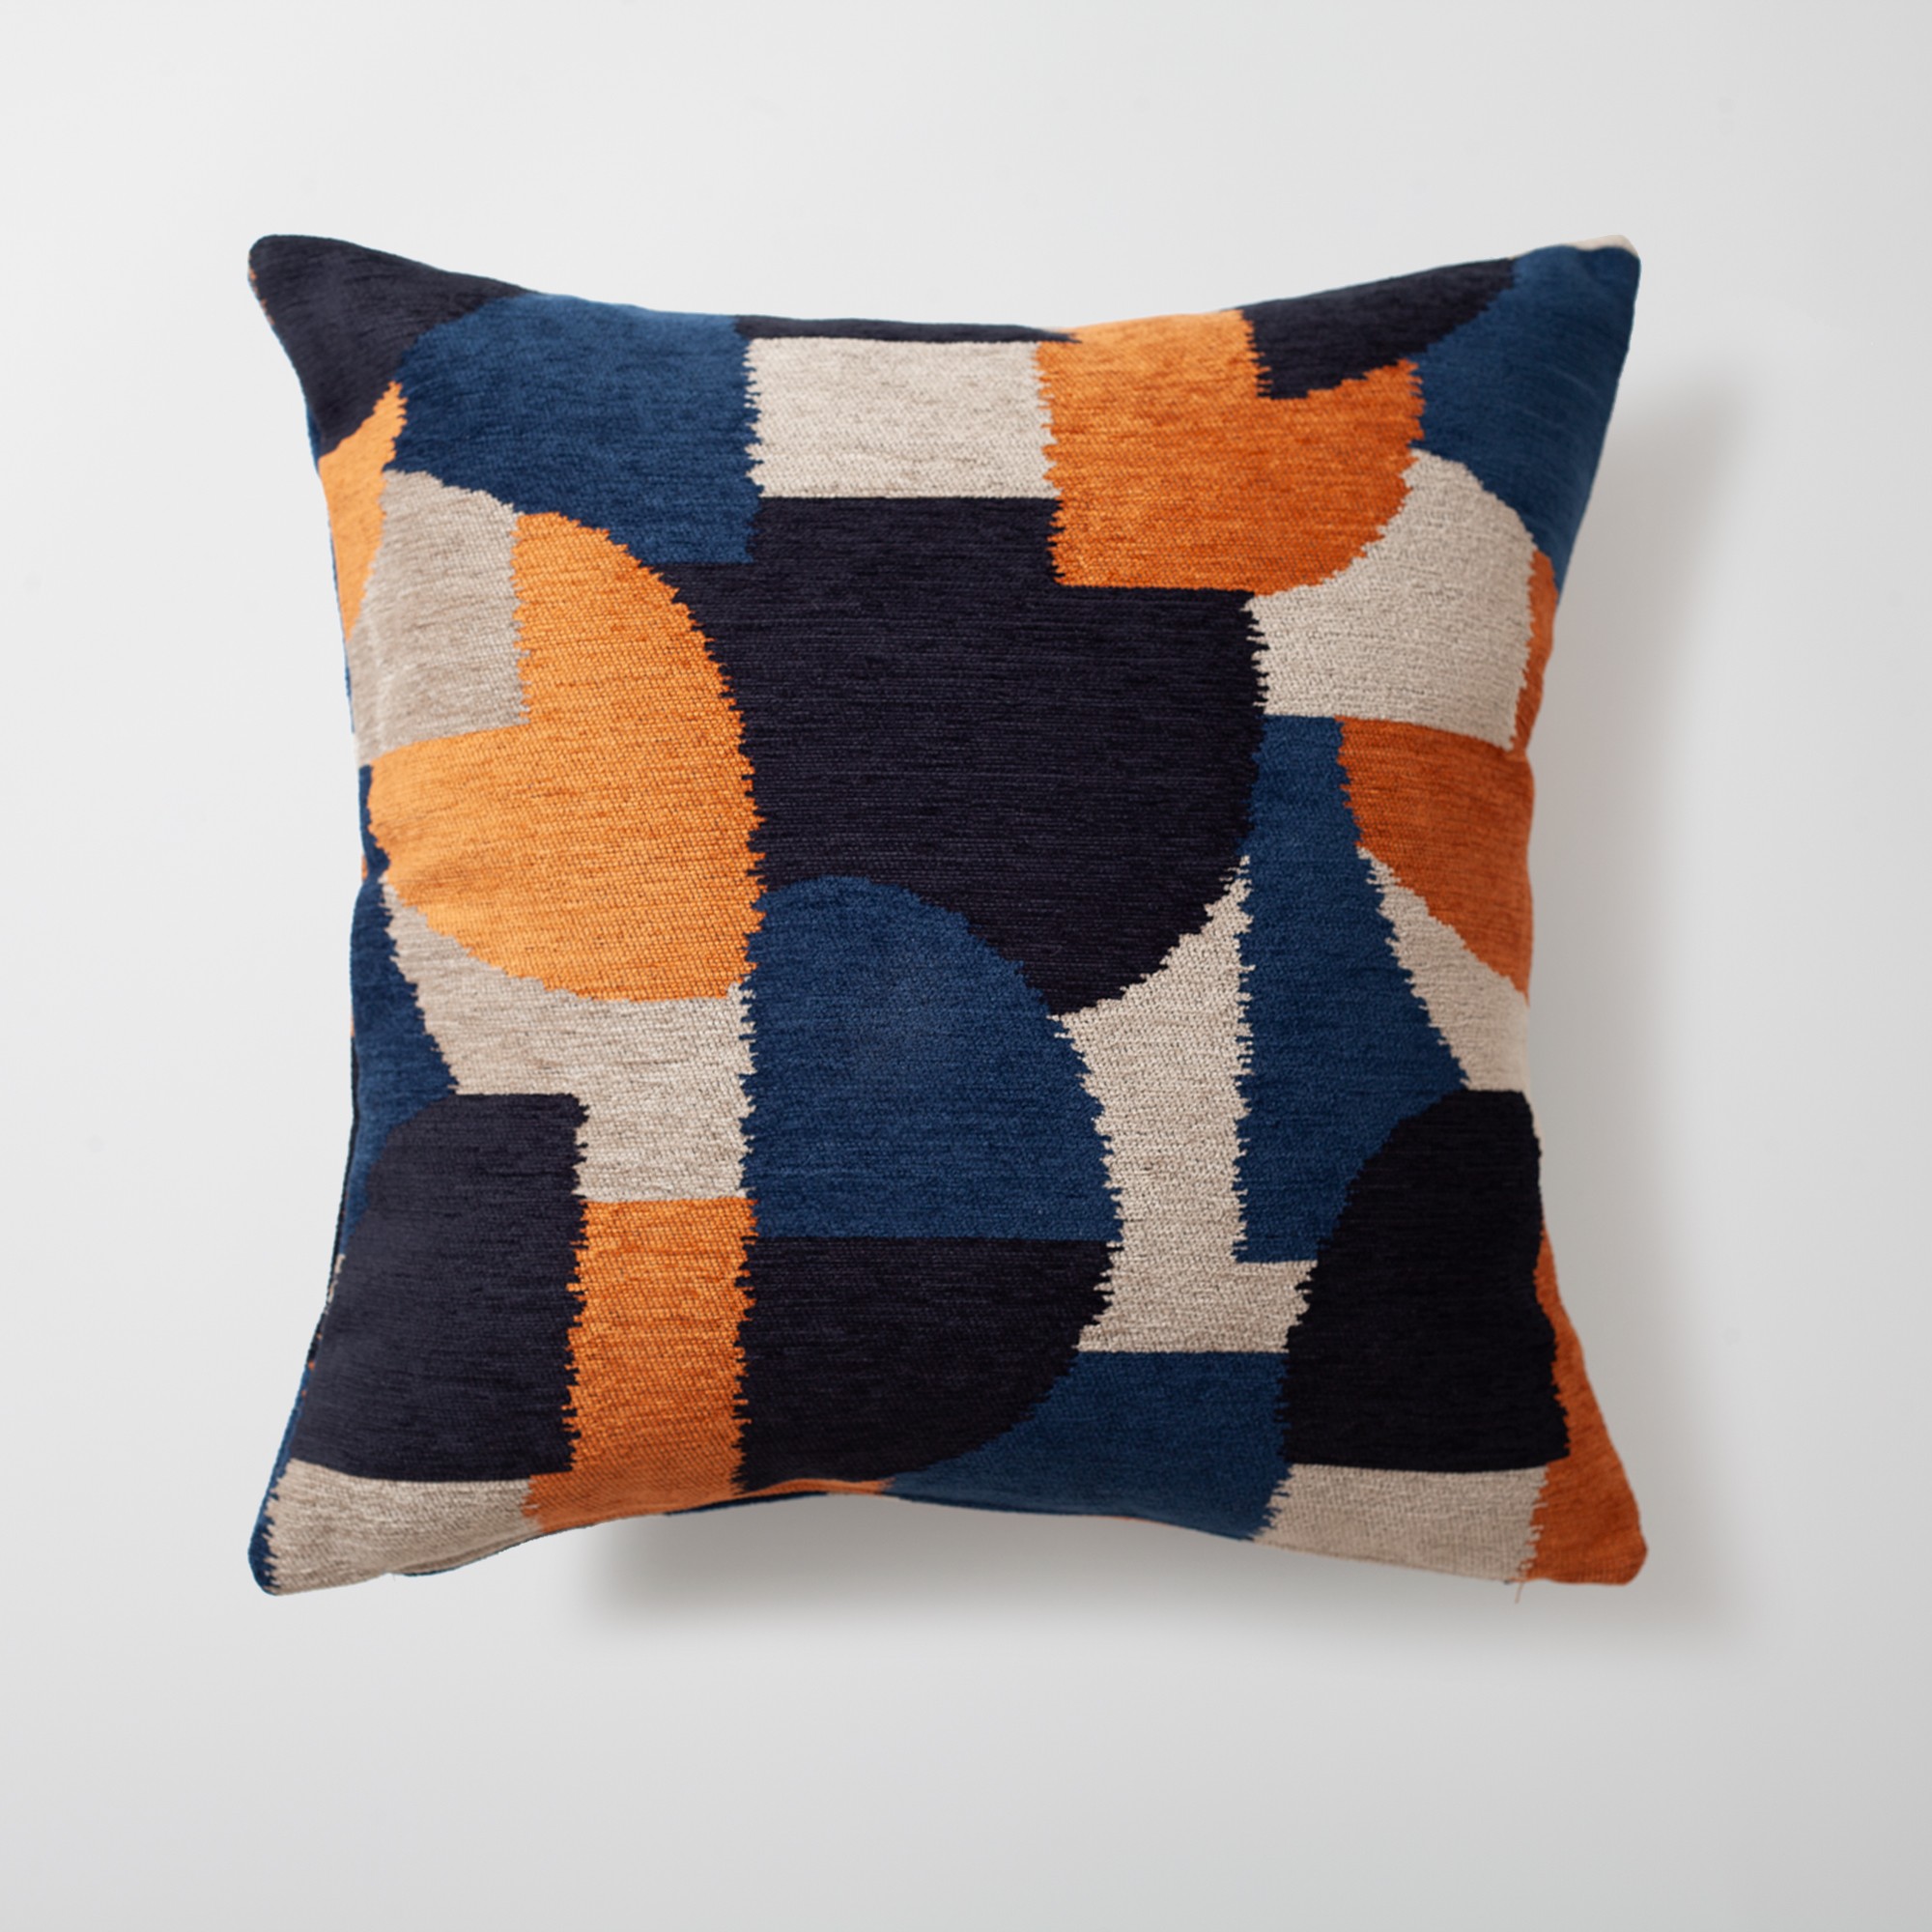 "Amorf" - Abstract Patterned 20x20 Inch Cushion - Orange (Cover Only)